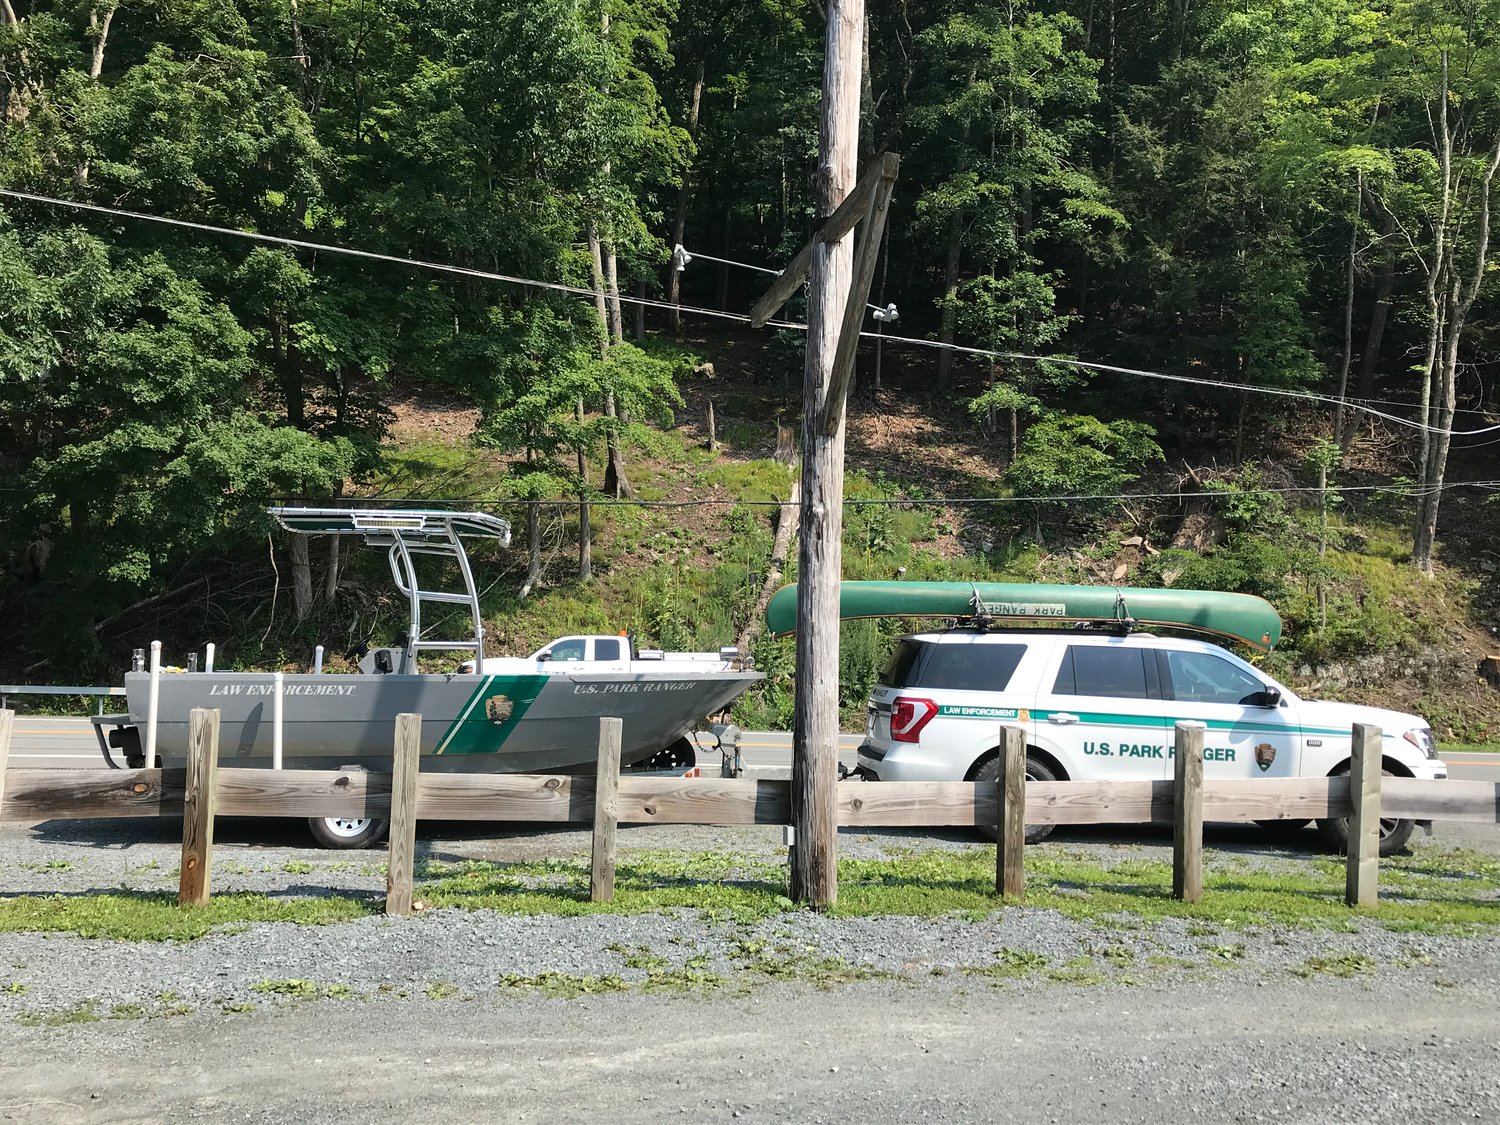 The National Park Service at the Cedar Rapids Campground for the recovery of the Peekskill victim's body.